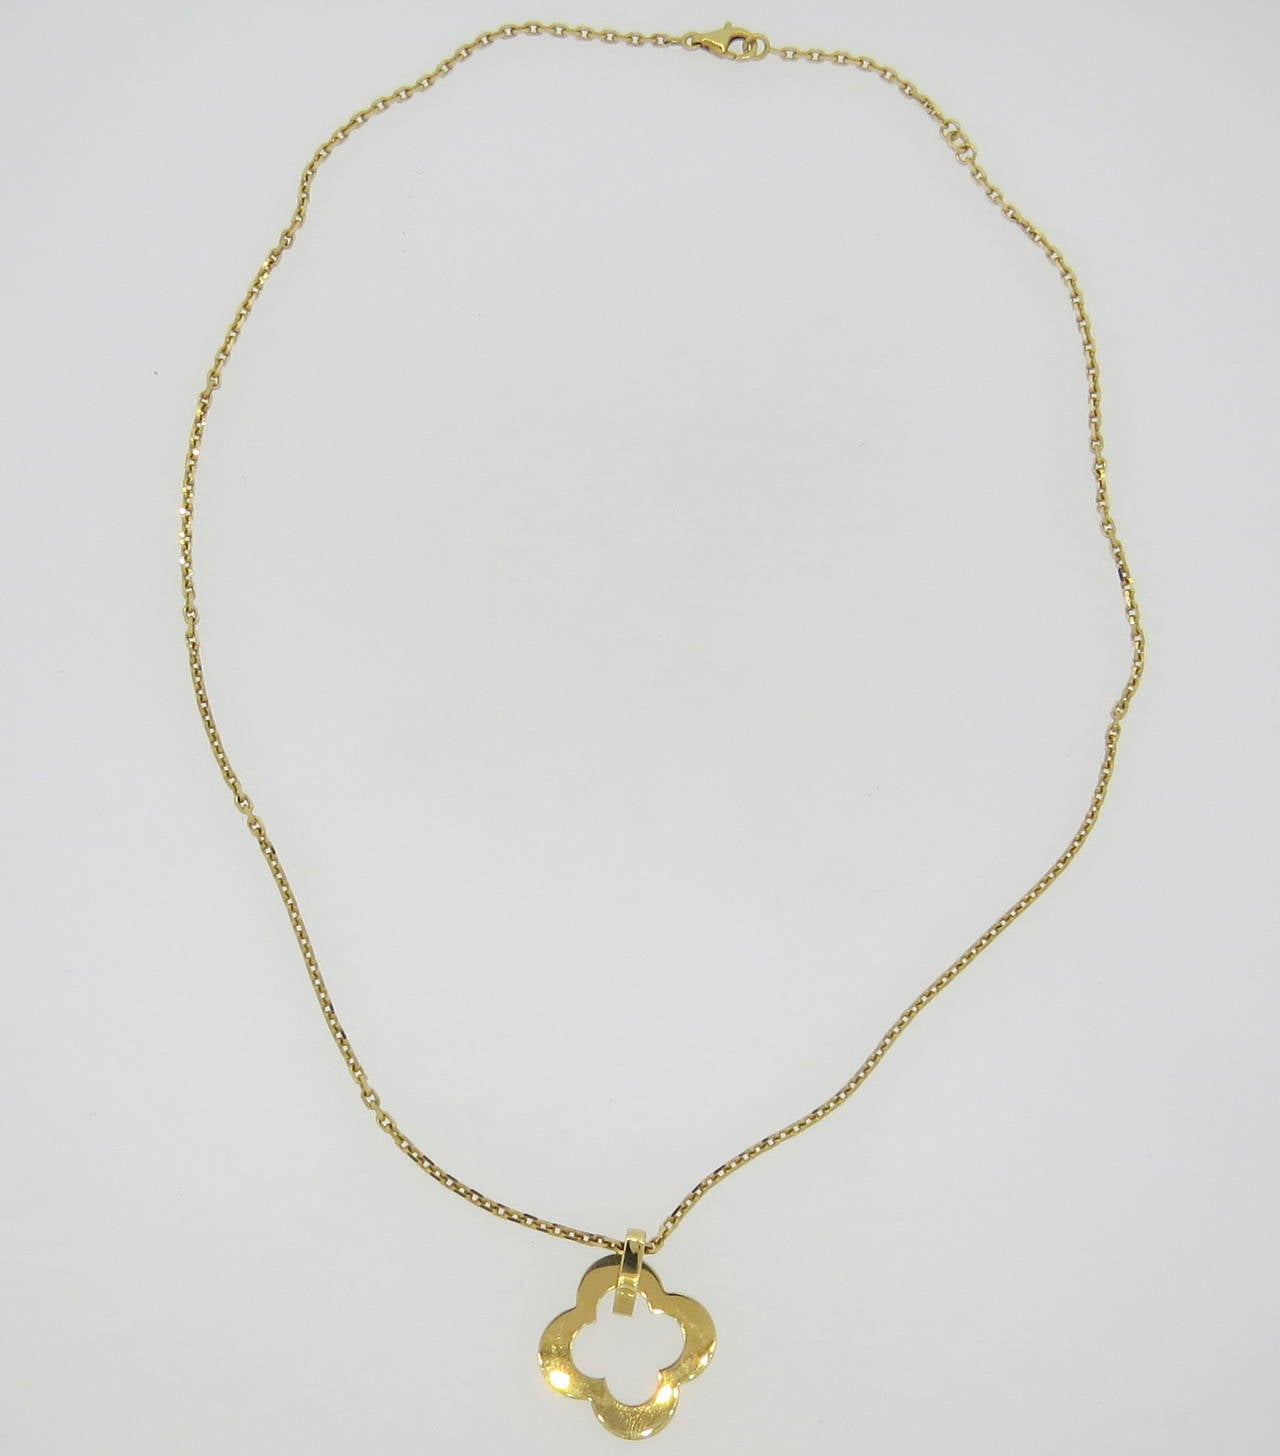 An 18k yellow gold necklace crafted by Van Cleef & Arpels.  The chain measures 18